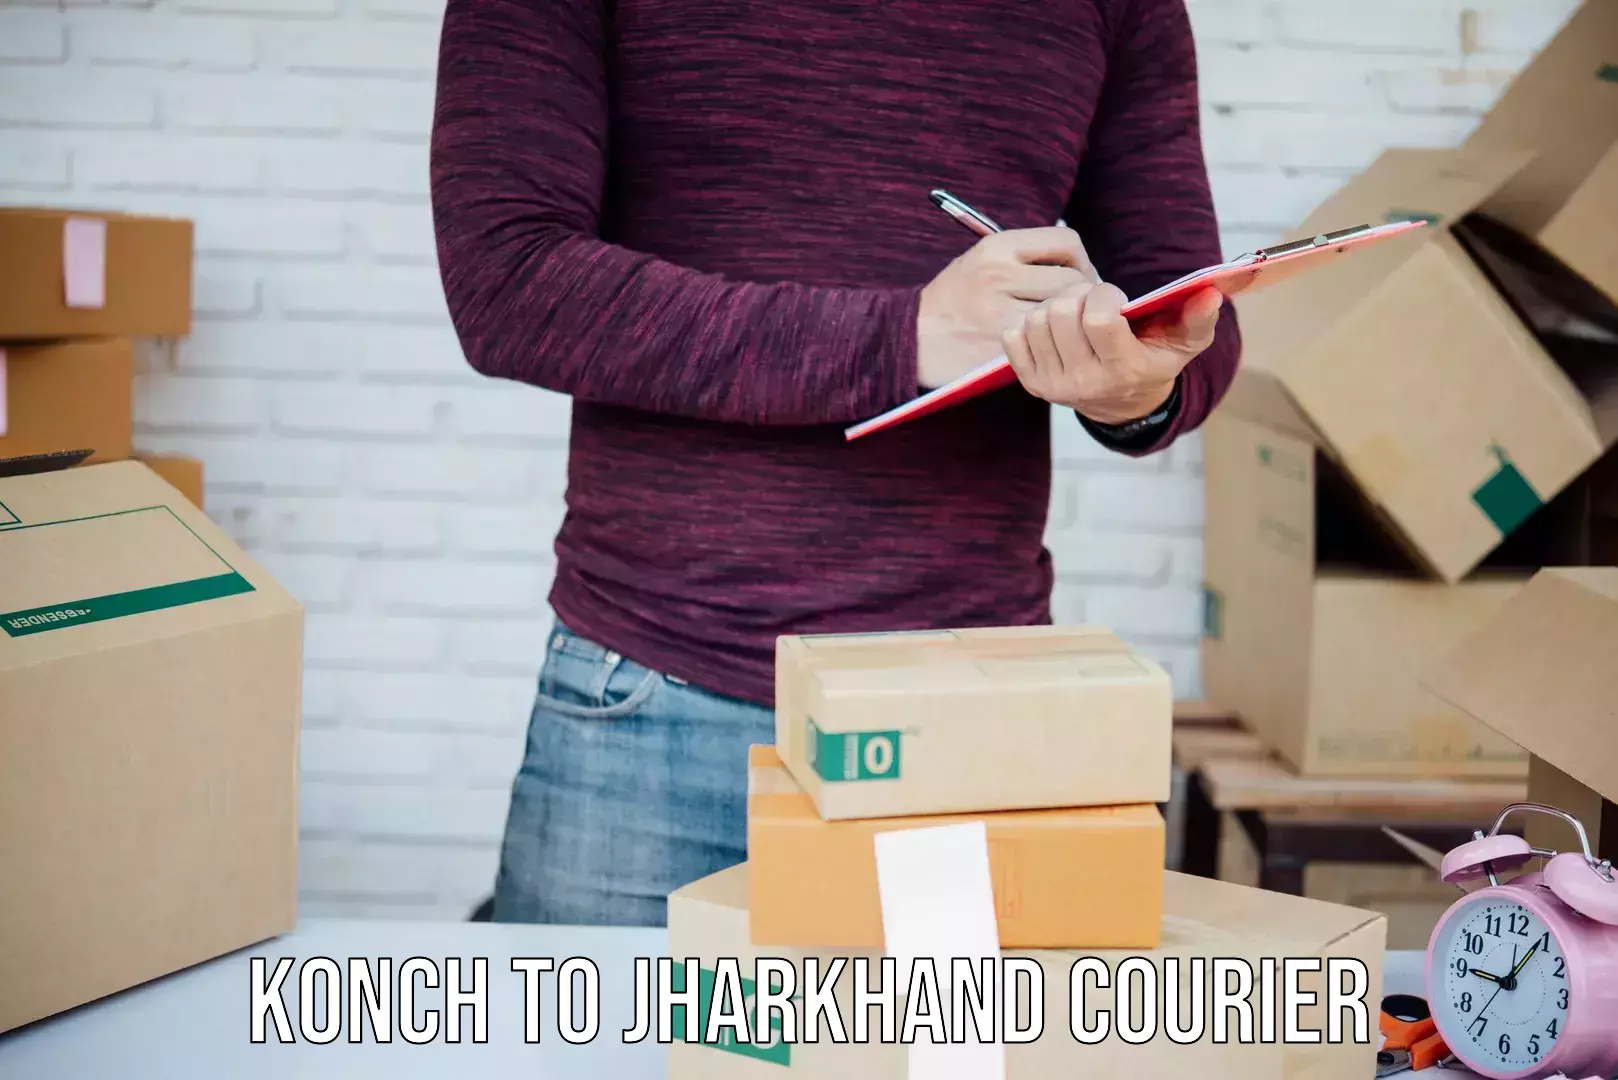 Online courier booking Konch to Bokaro